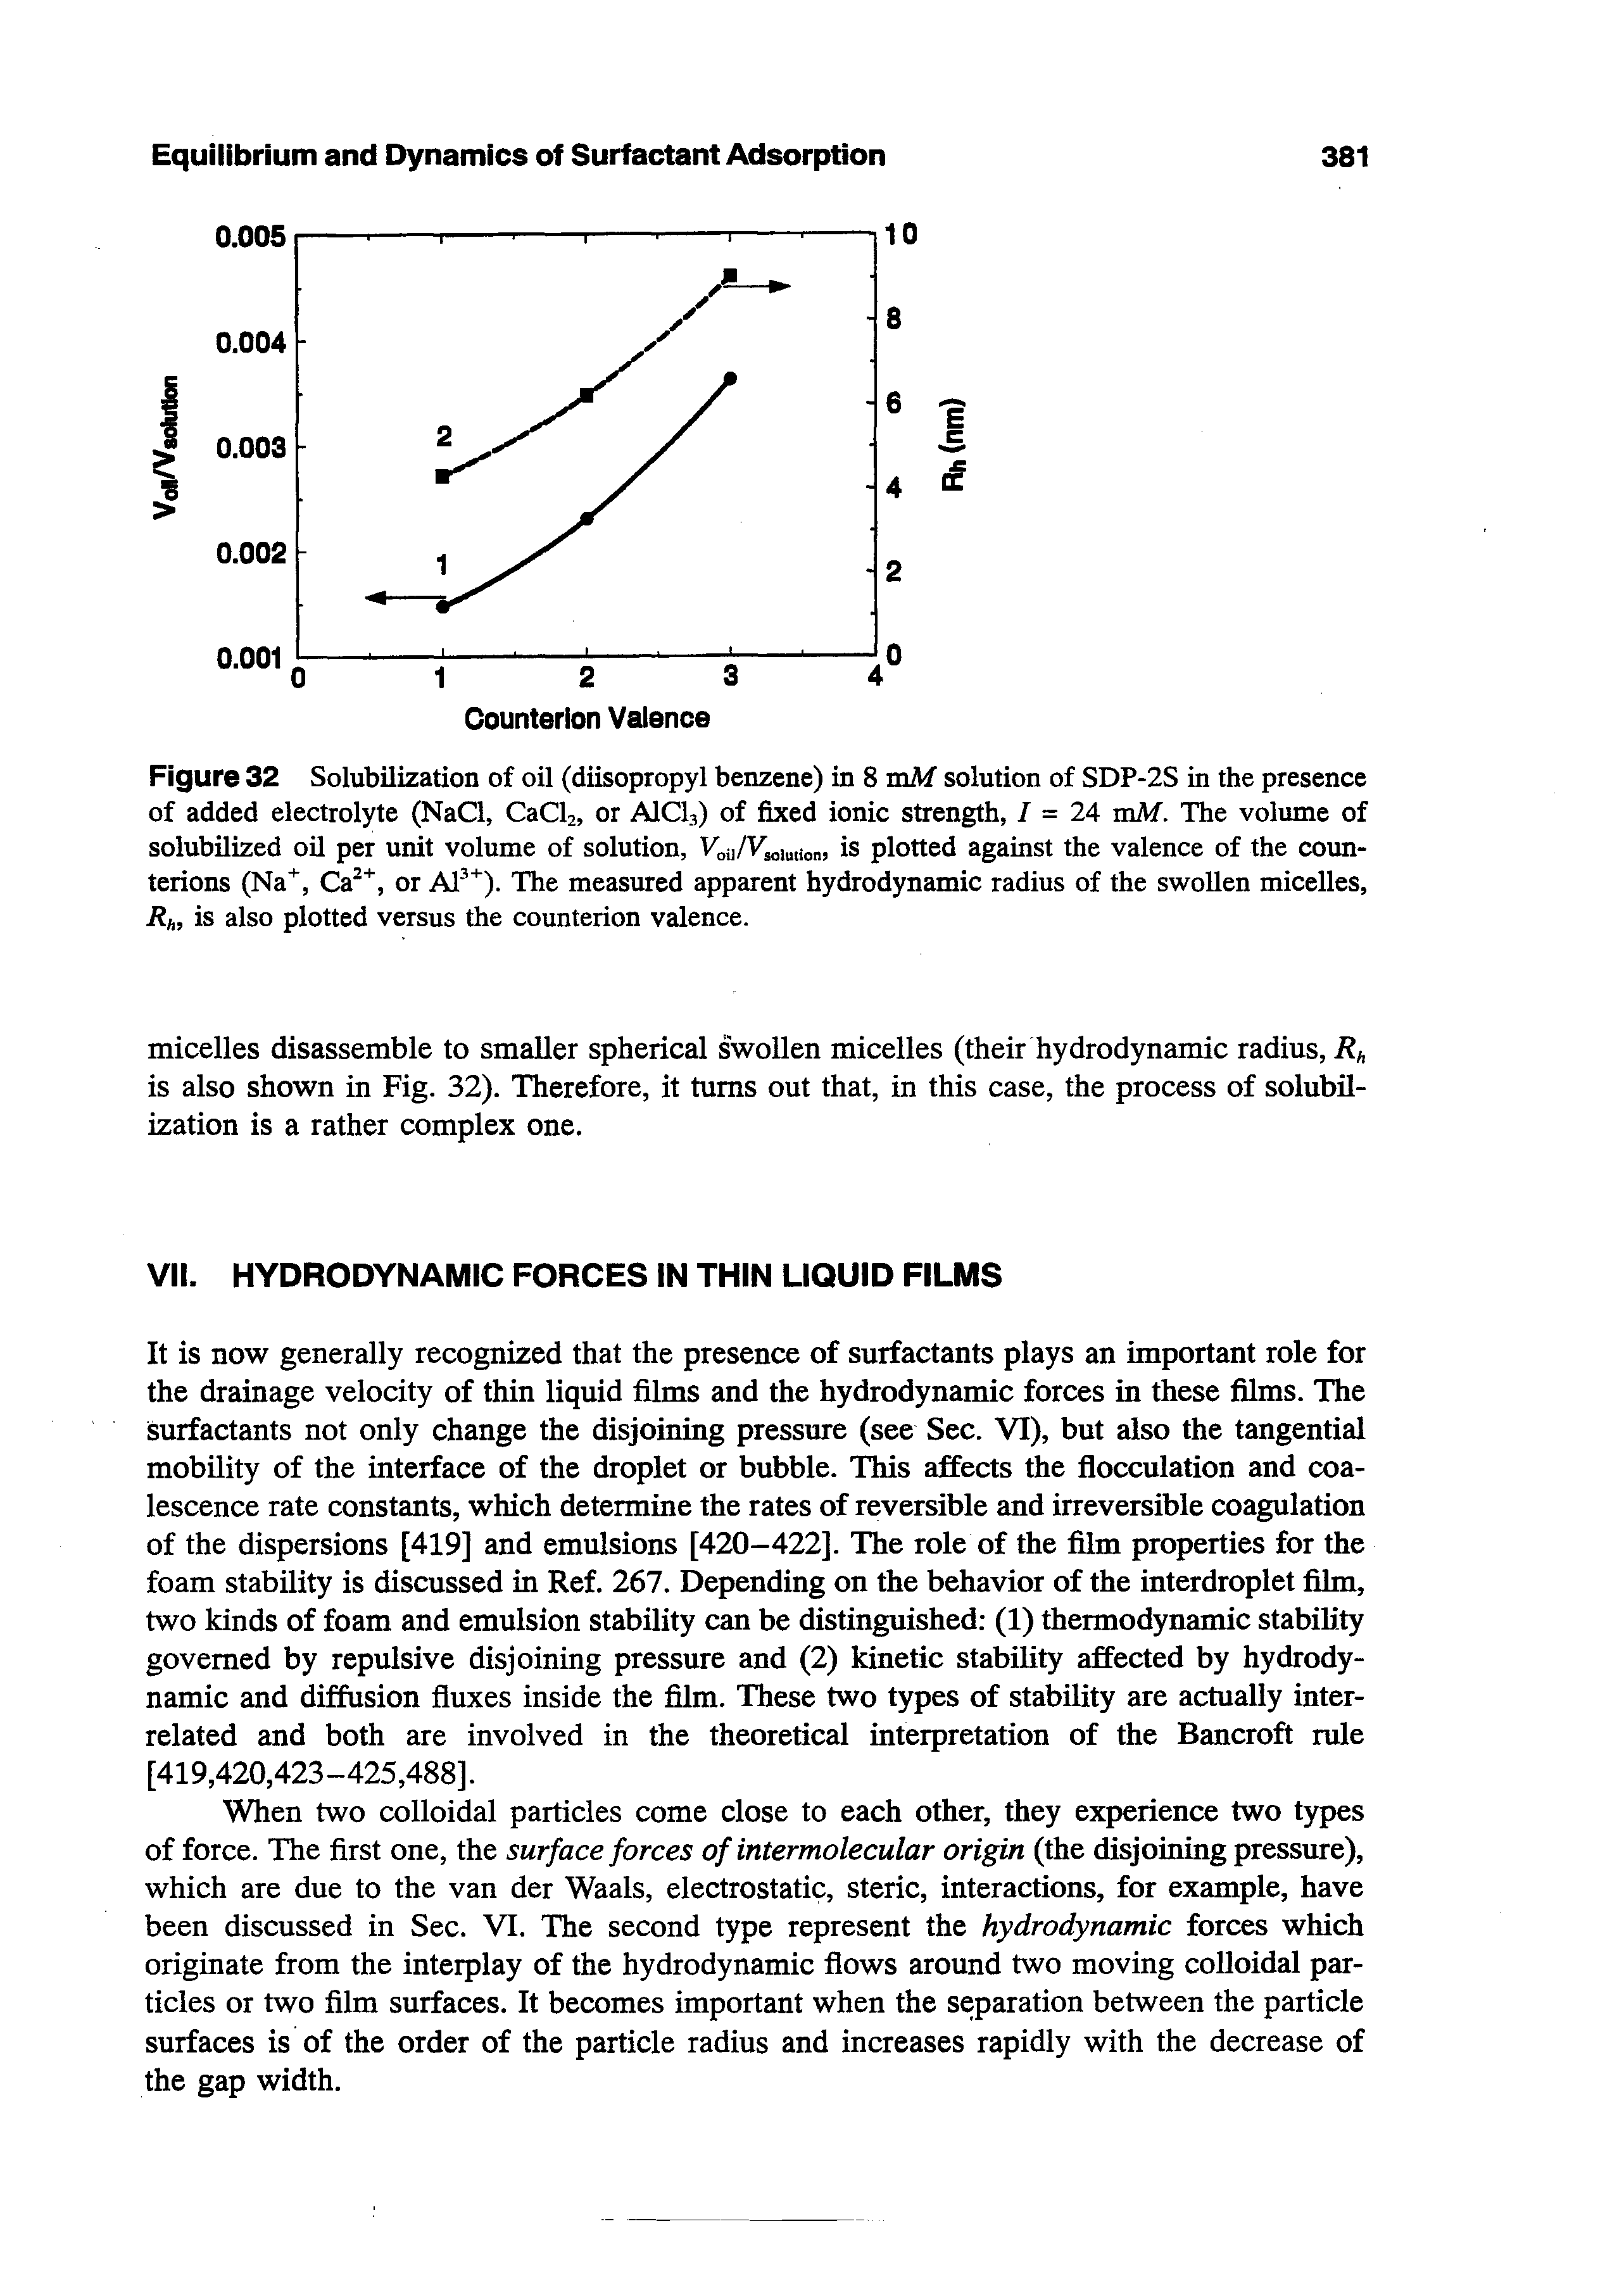 Figure 32 Solubilization of oil (diisopropyl benzene) in 8 mM solution of SDP-2S in the presence of added electrolyte (NaCl, CaClz, or AlCl,) of fixed ionic strength, / = 24 mM. The volume of solubilized oil per unit volume of solution, Vou/ soiuiion> is plotted against the valence of the counterions (Na", Ca ", or Al " ). The measured apparent hydrodynamic radius of the swollen micelles, Rh, is also plotted versus the counterion valence.